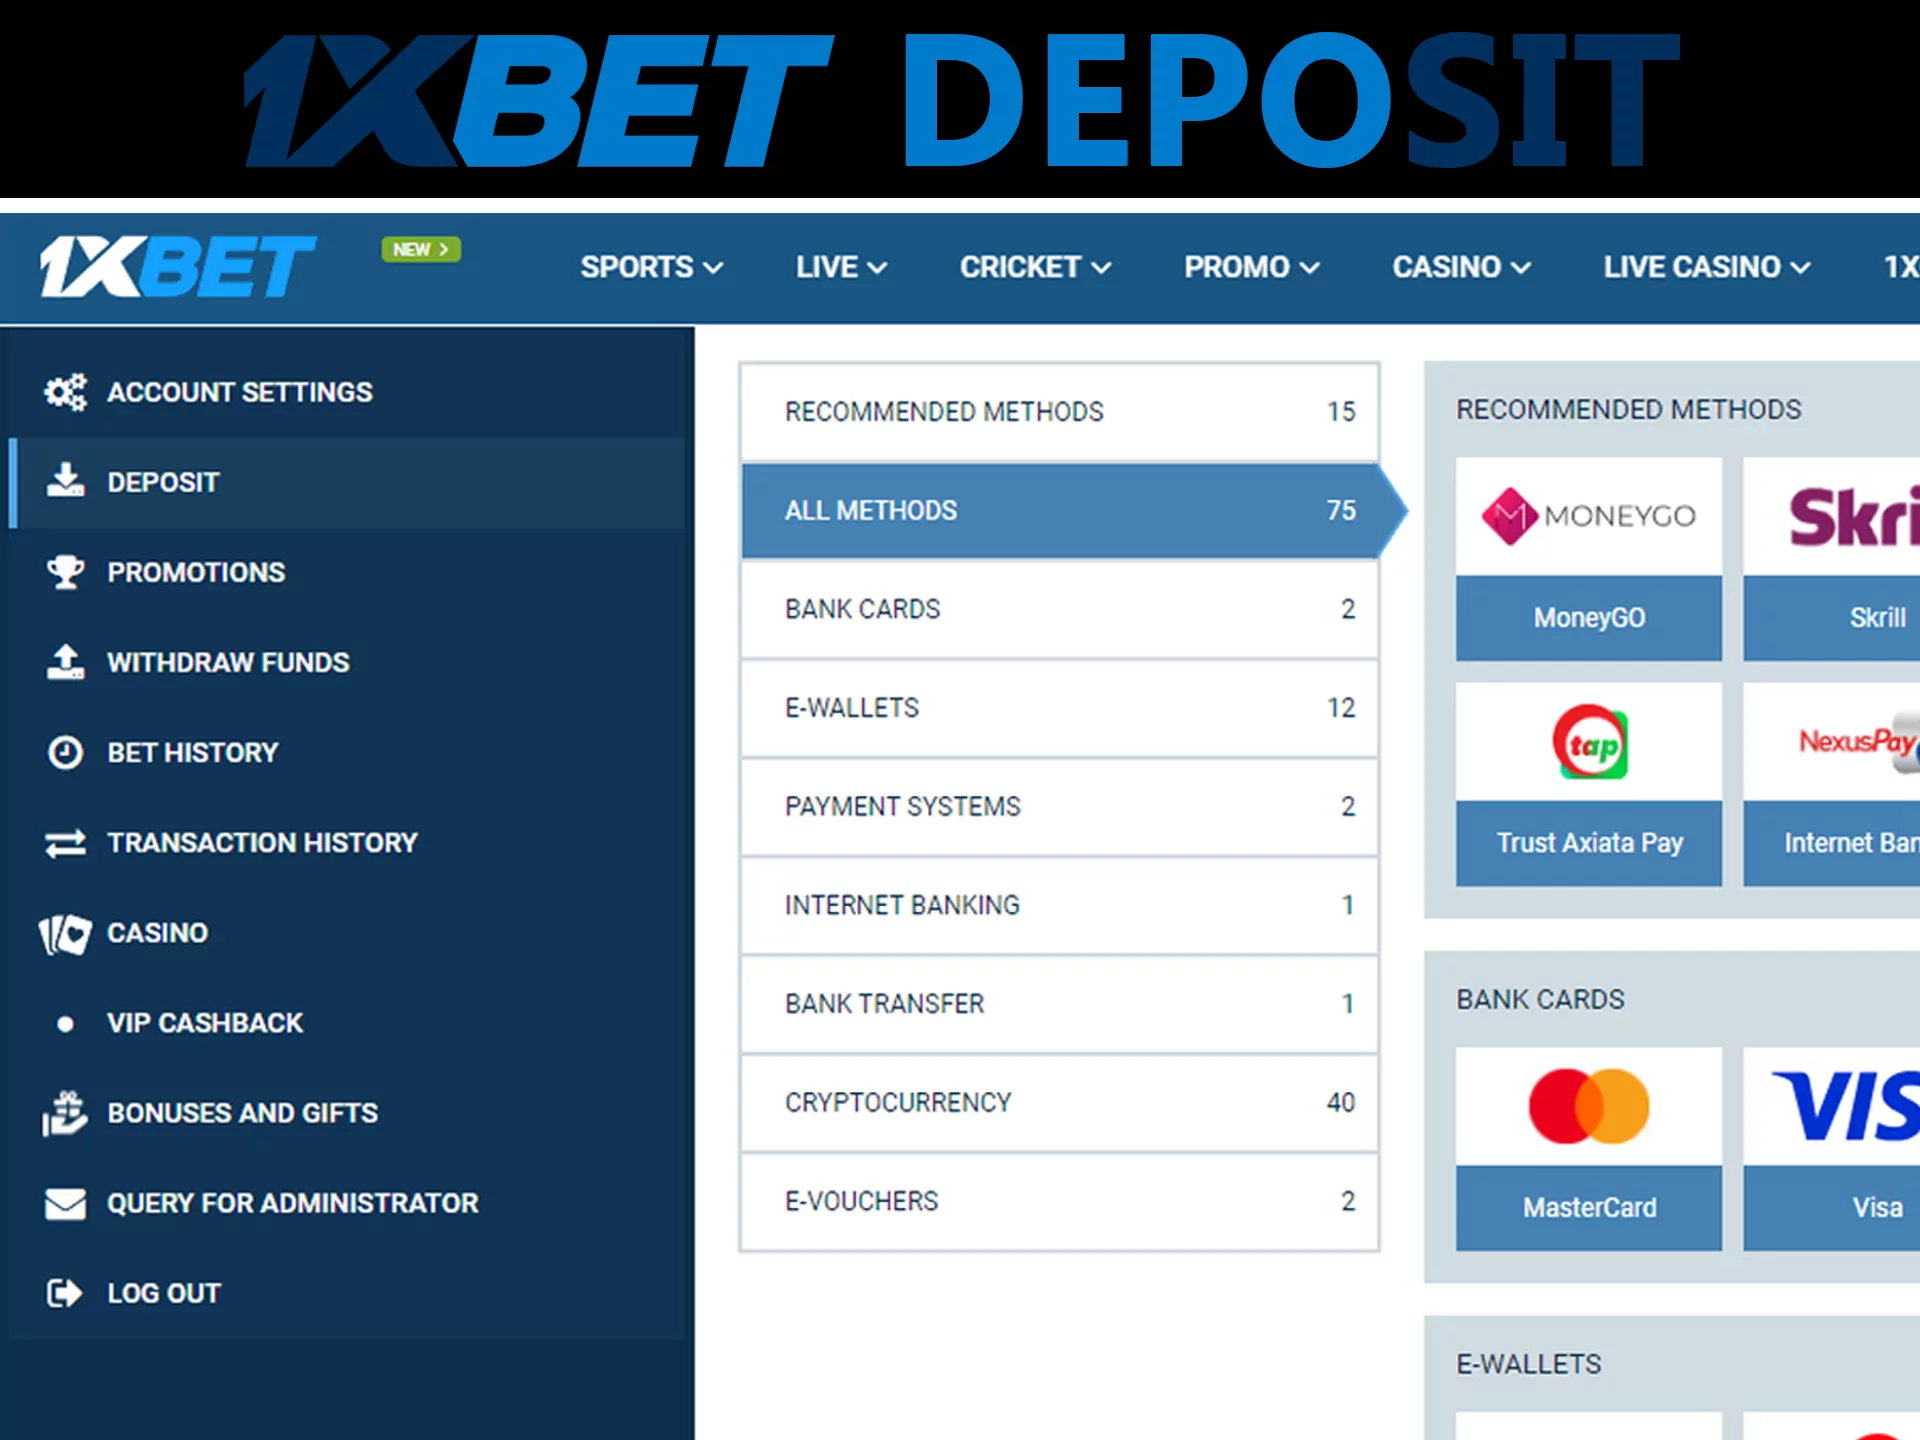 1xbet depositing – step-by-step instruction.